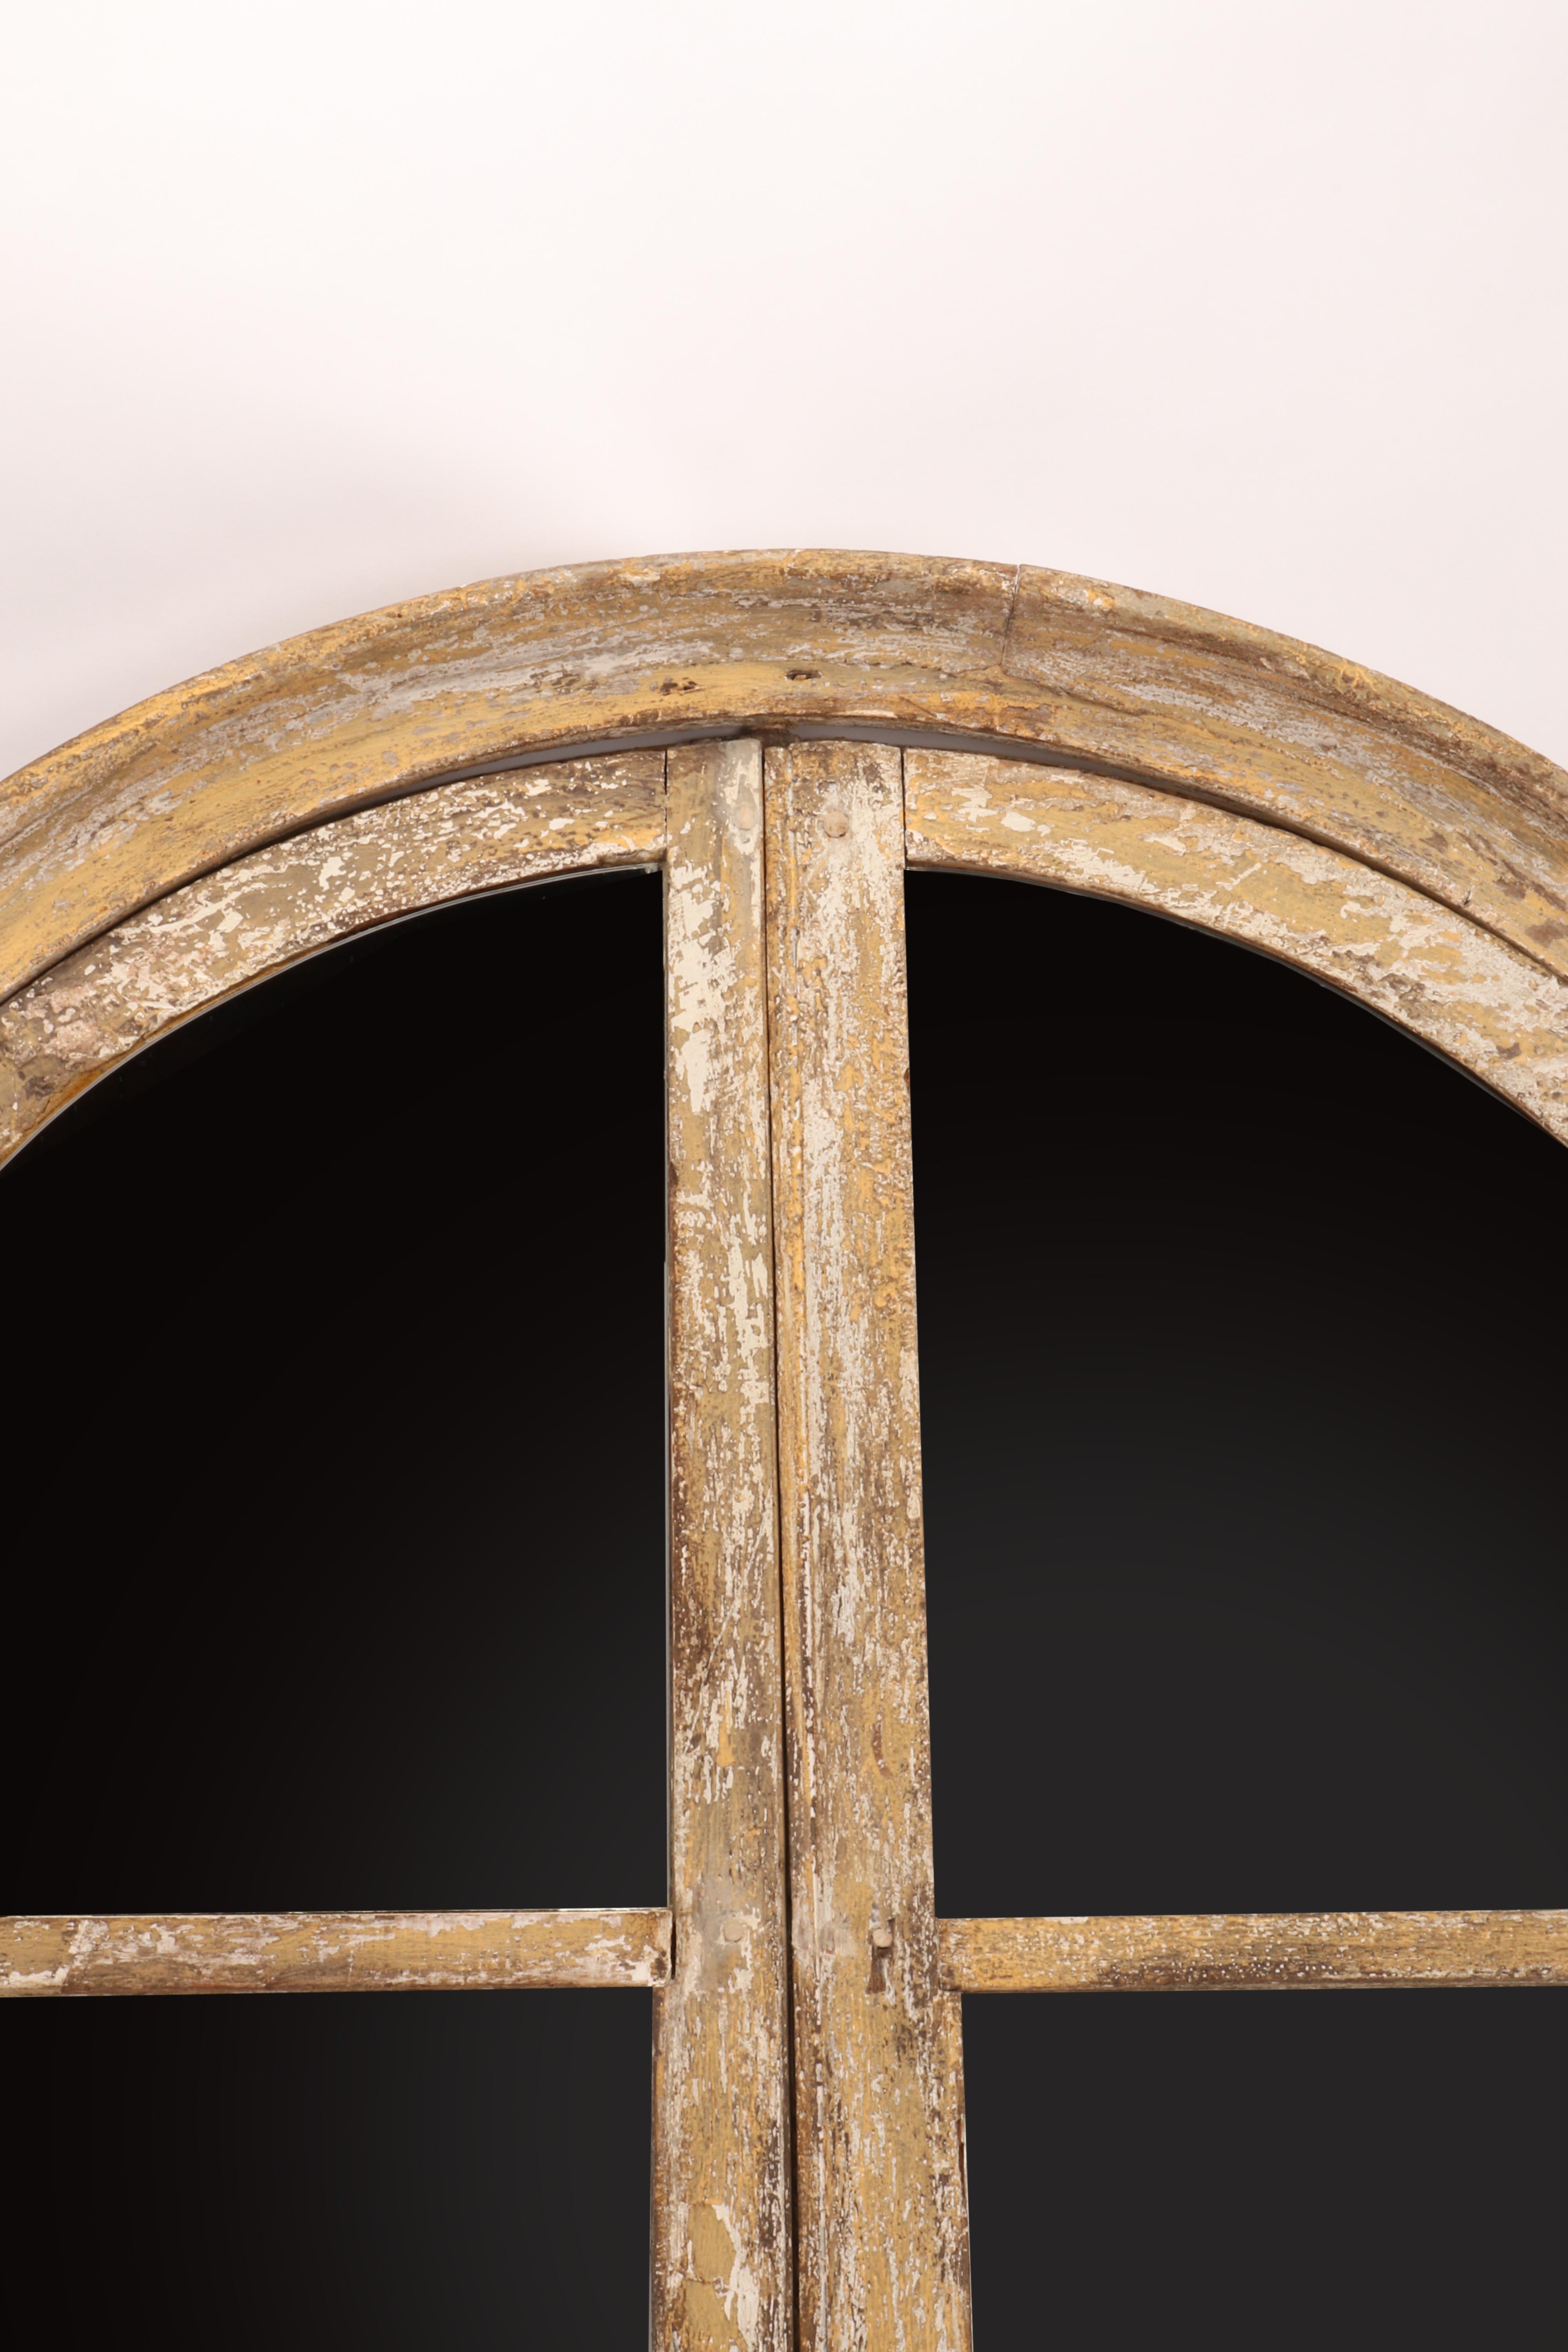 A fine example of reinterpretation and realization of an antique 18th century architectural element. A wooden round window of an old house, with original hinges, have been reused as a mirror. The frame is made out of painted wood, white color,